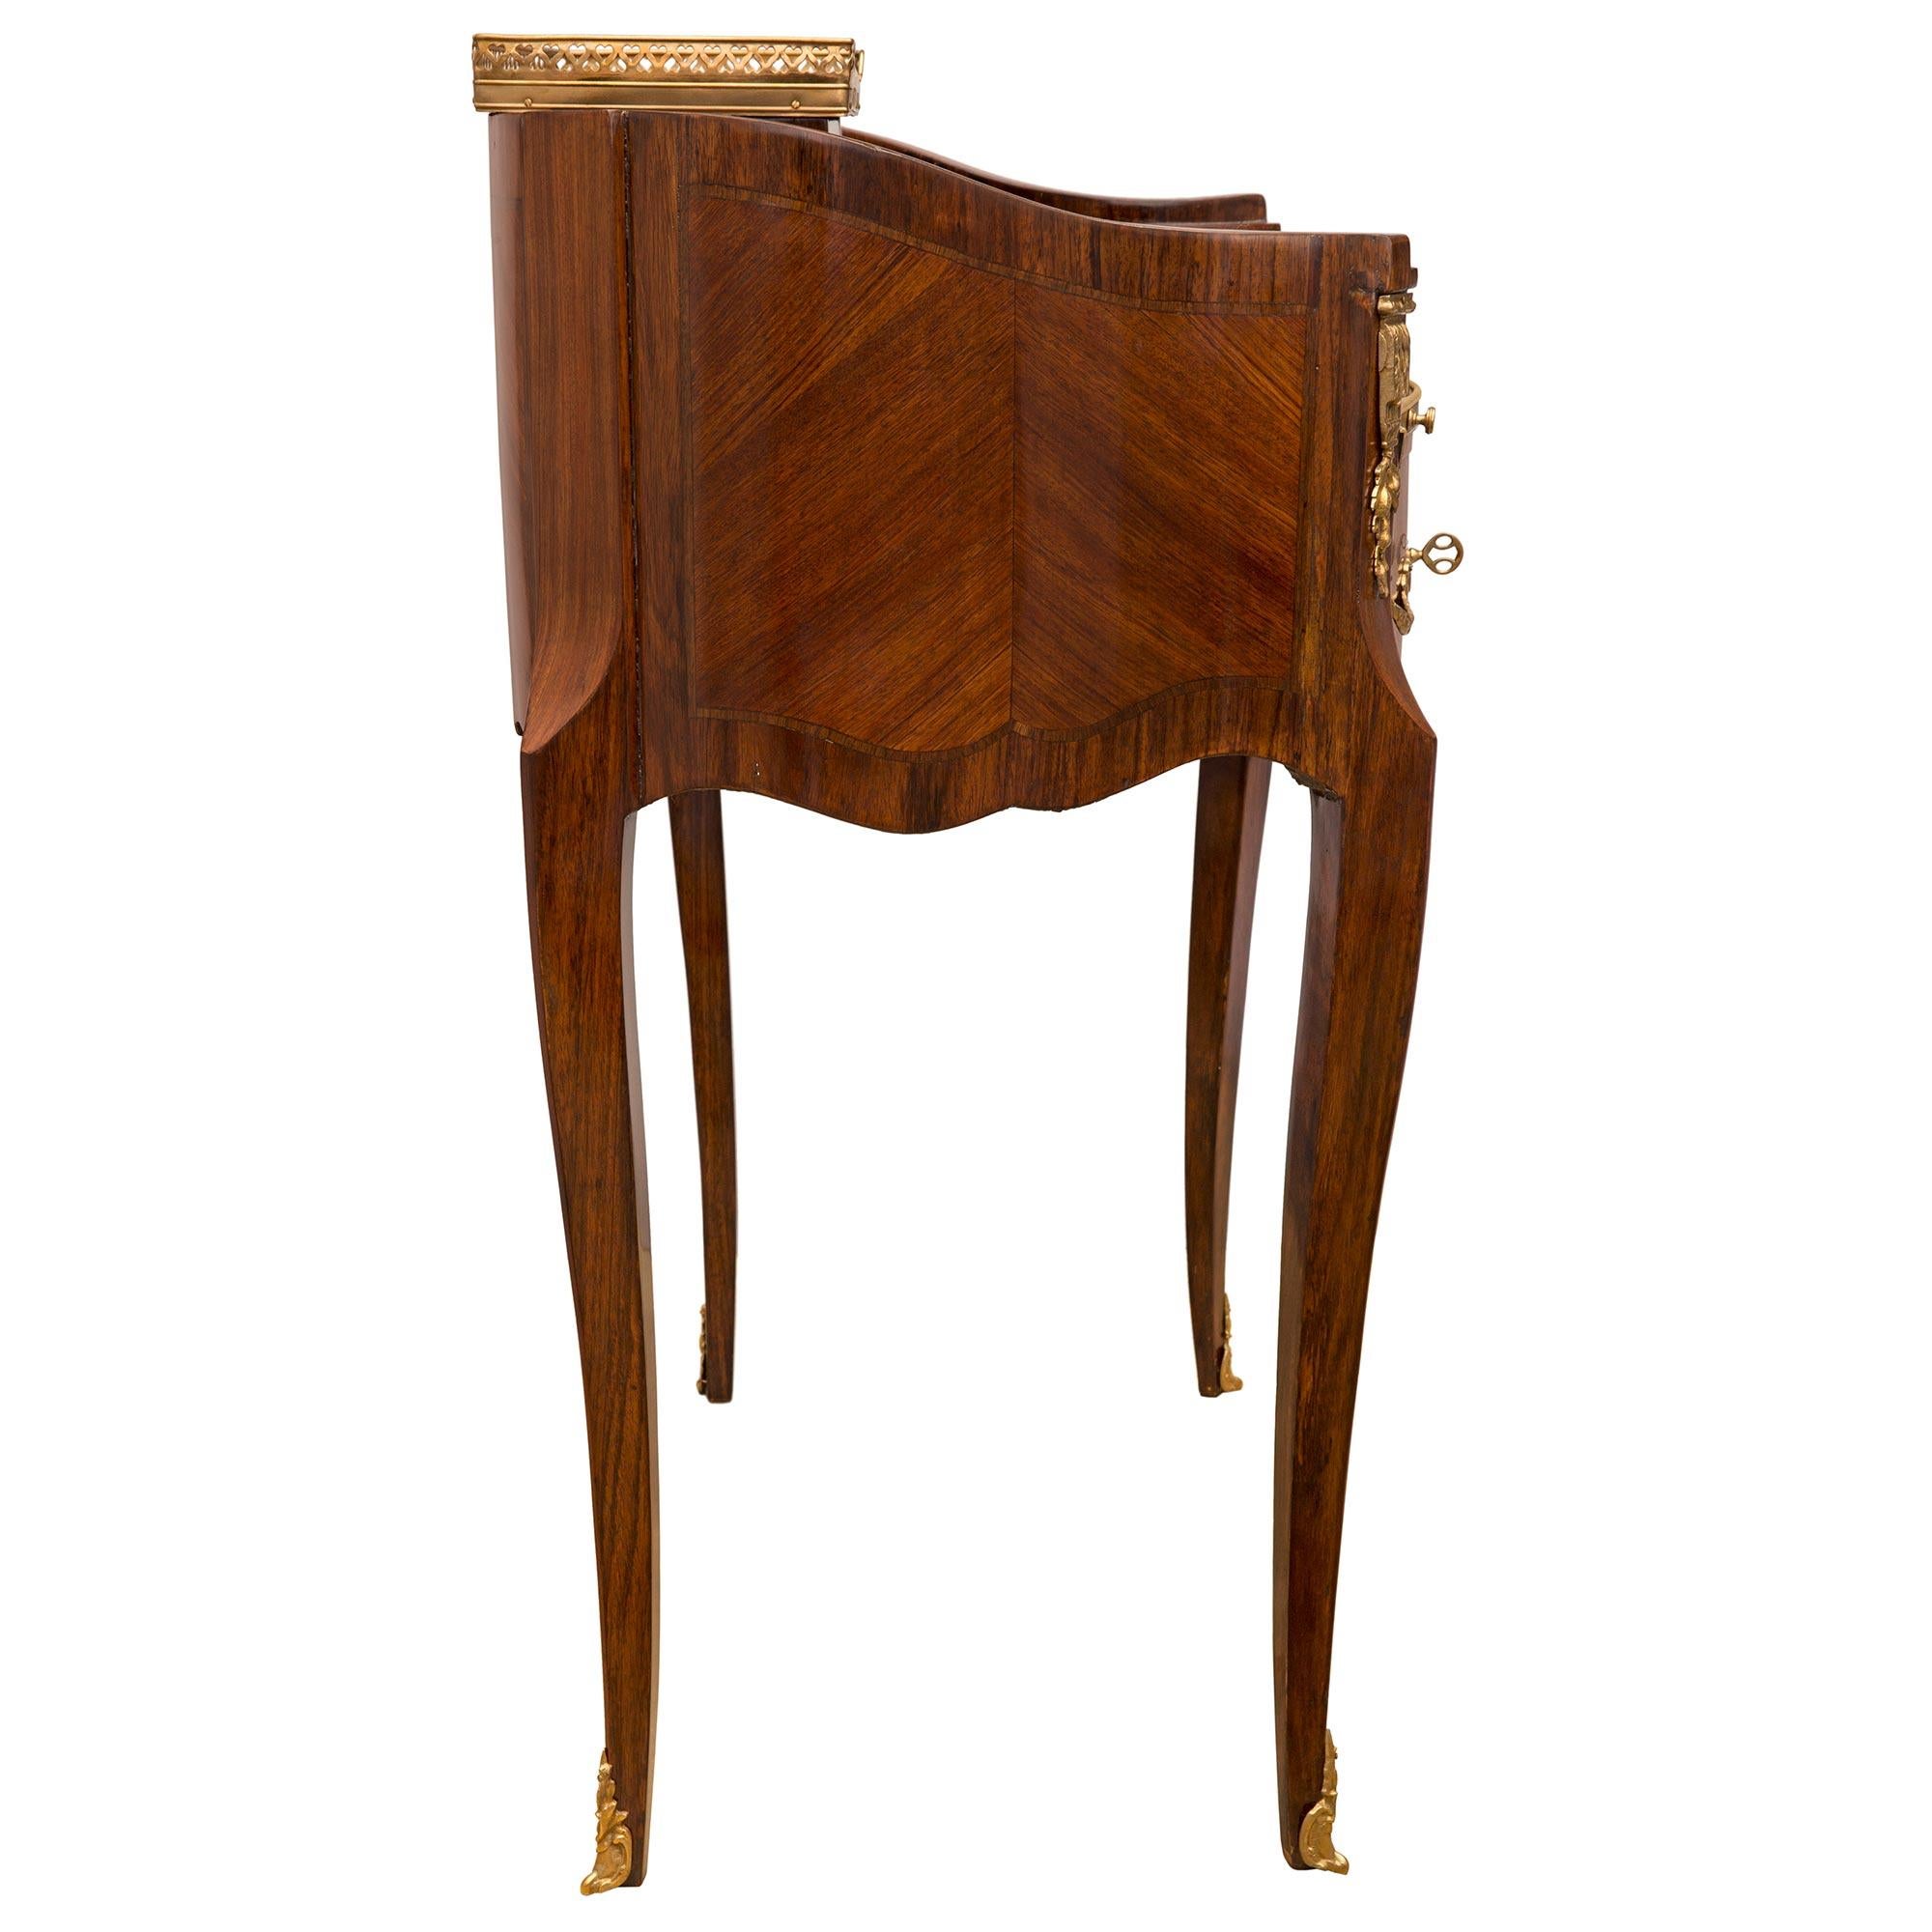 French 19th Century Transitional St. Kingwood, Tulipwood and Ormolu Desk For Sale 1